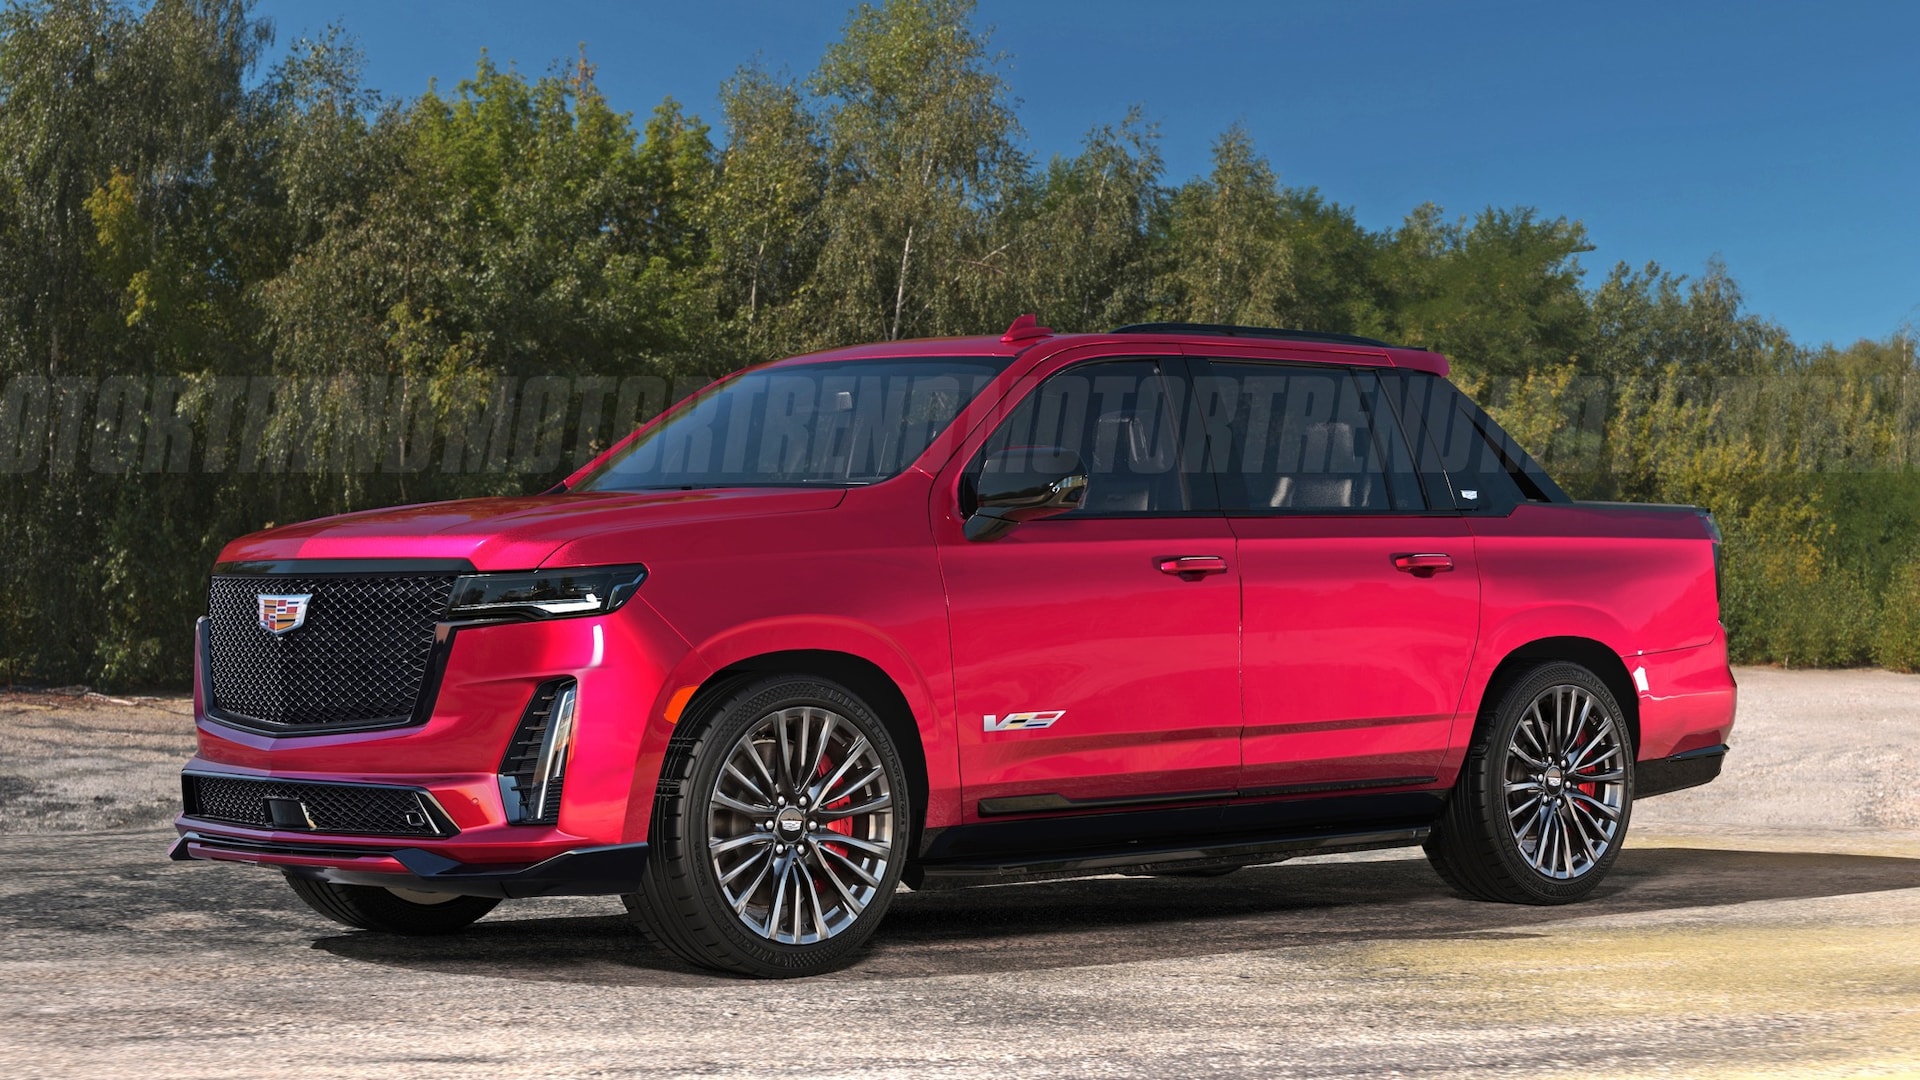 Should Cadillac Build an Escalade-V EXT Luxury Sport Truck?